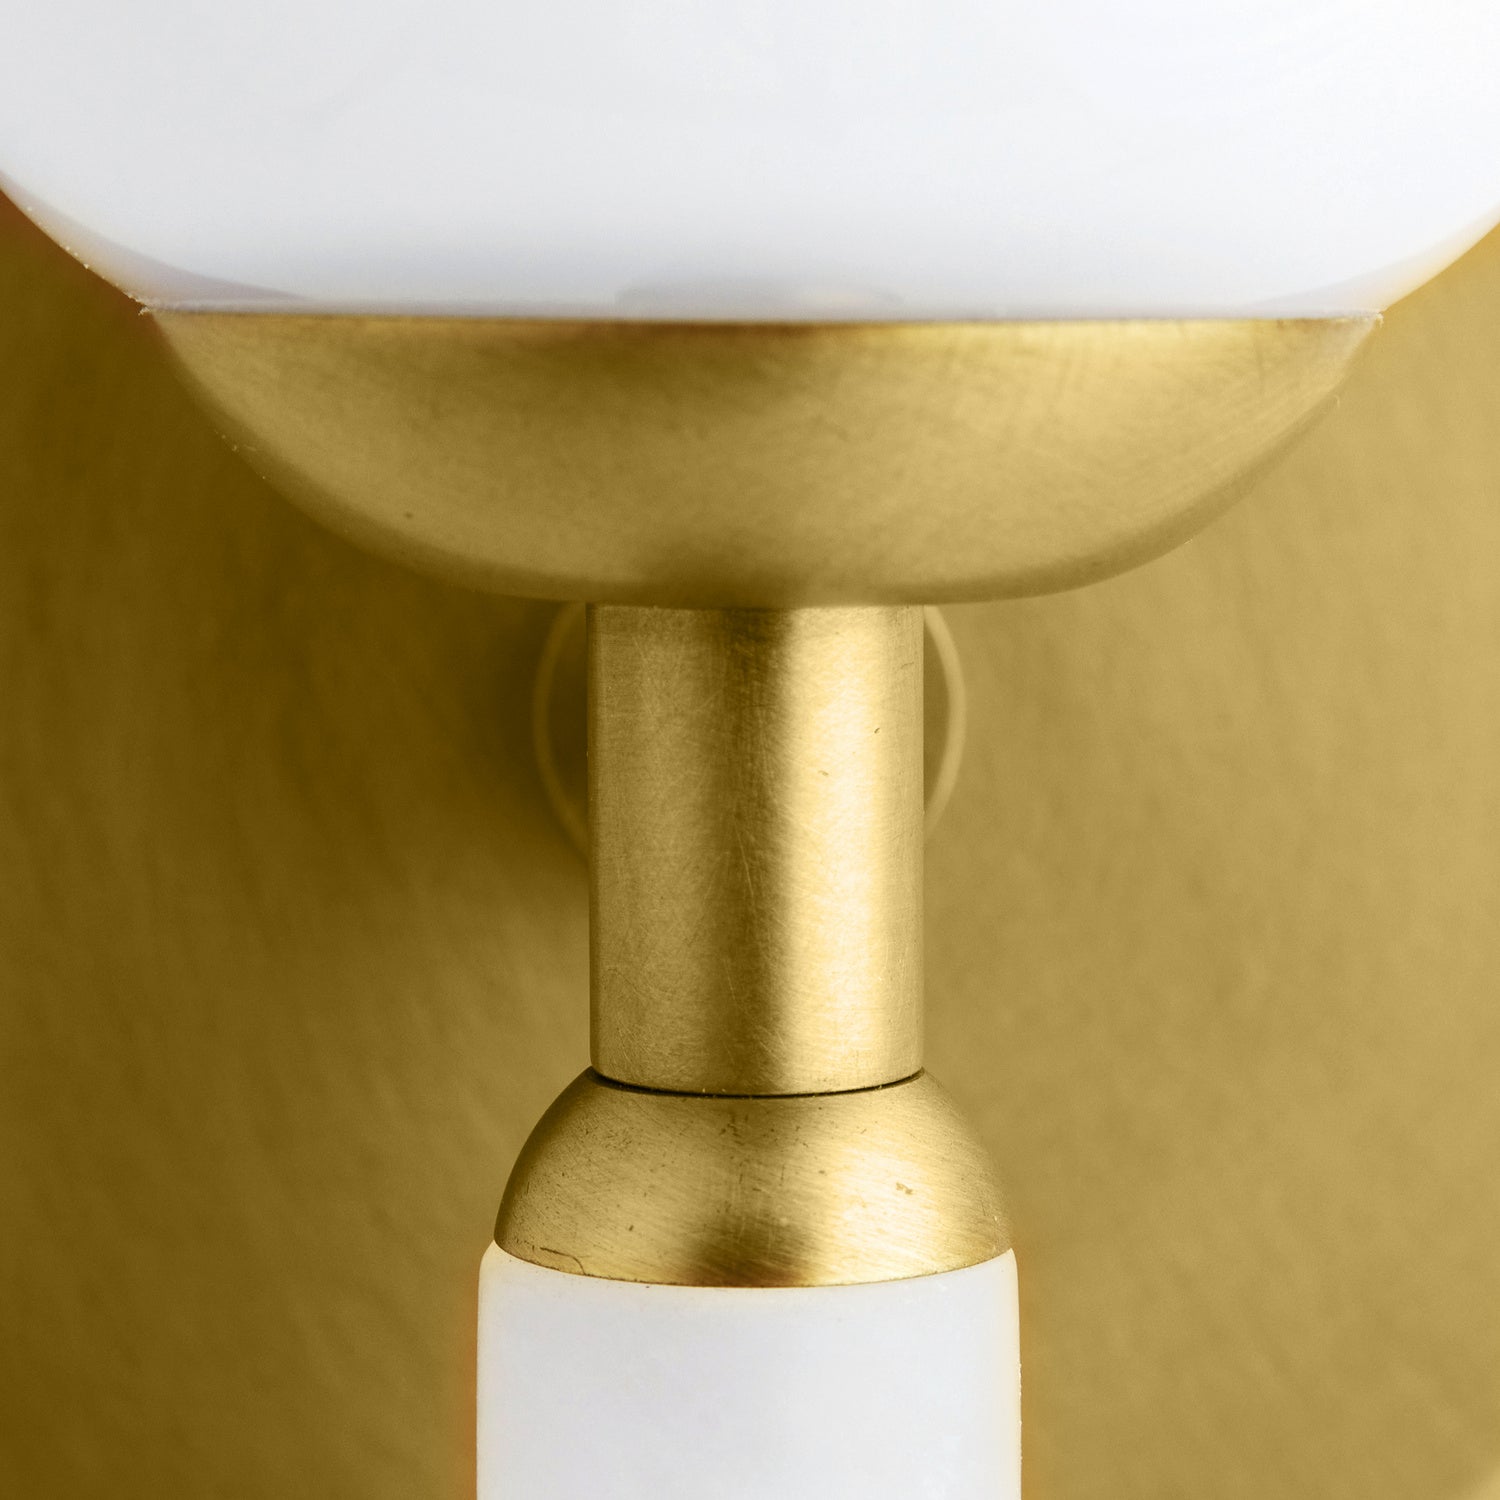 One Light Wall Sconce from the Norwalk collection in Opal finish